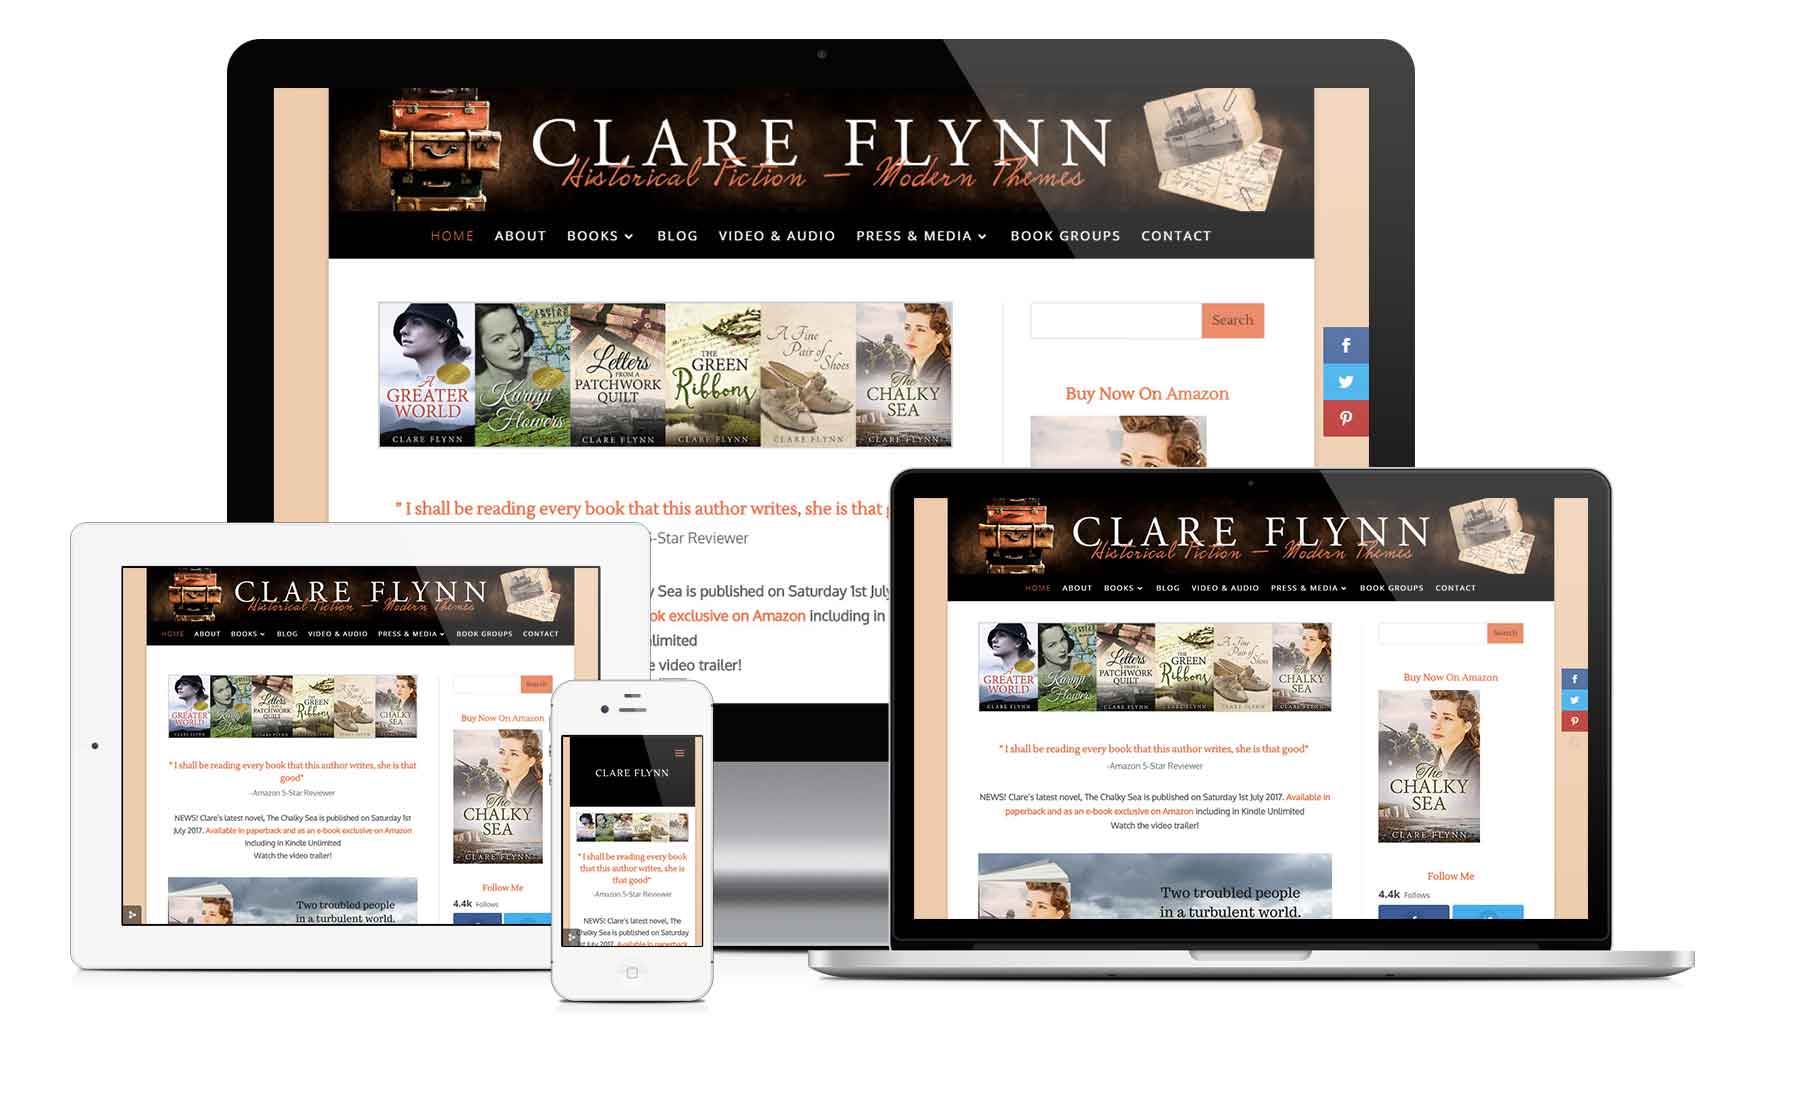 image of the website clareflynn.co.uk as seen on different devices